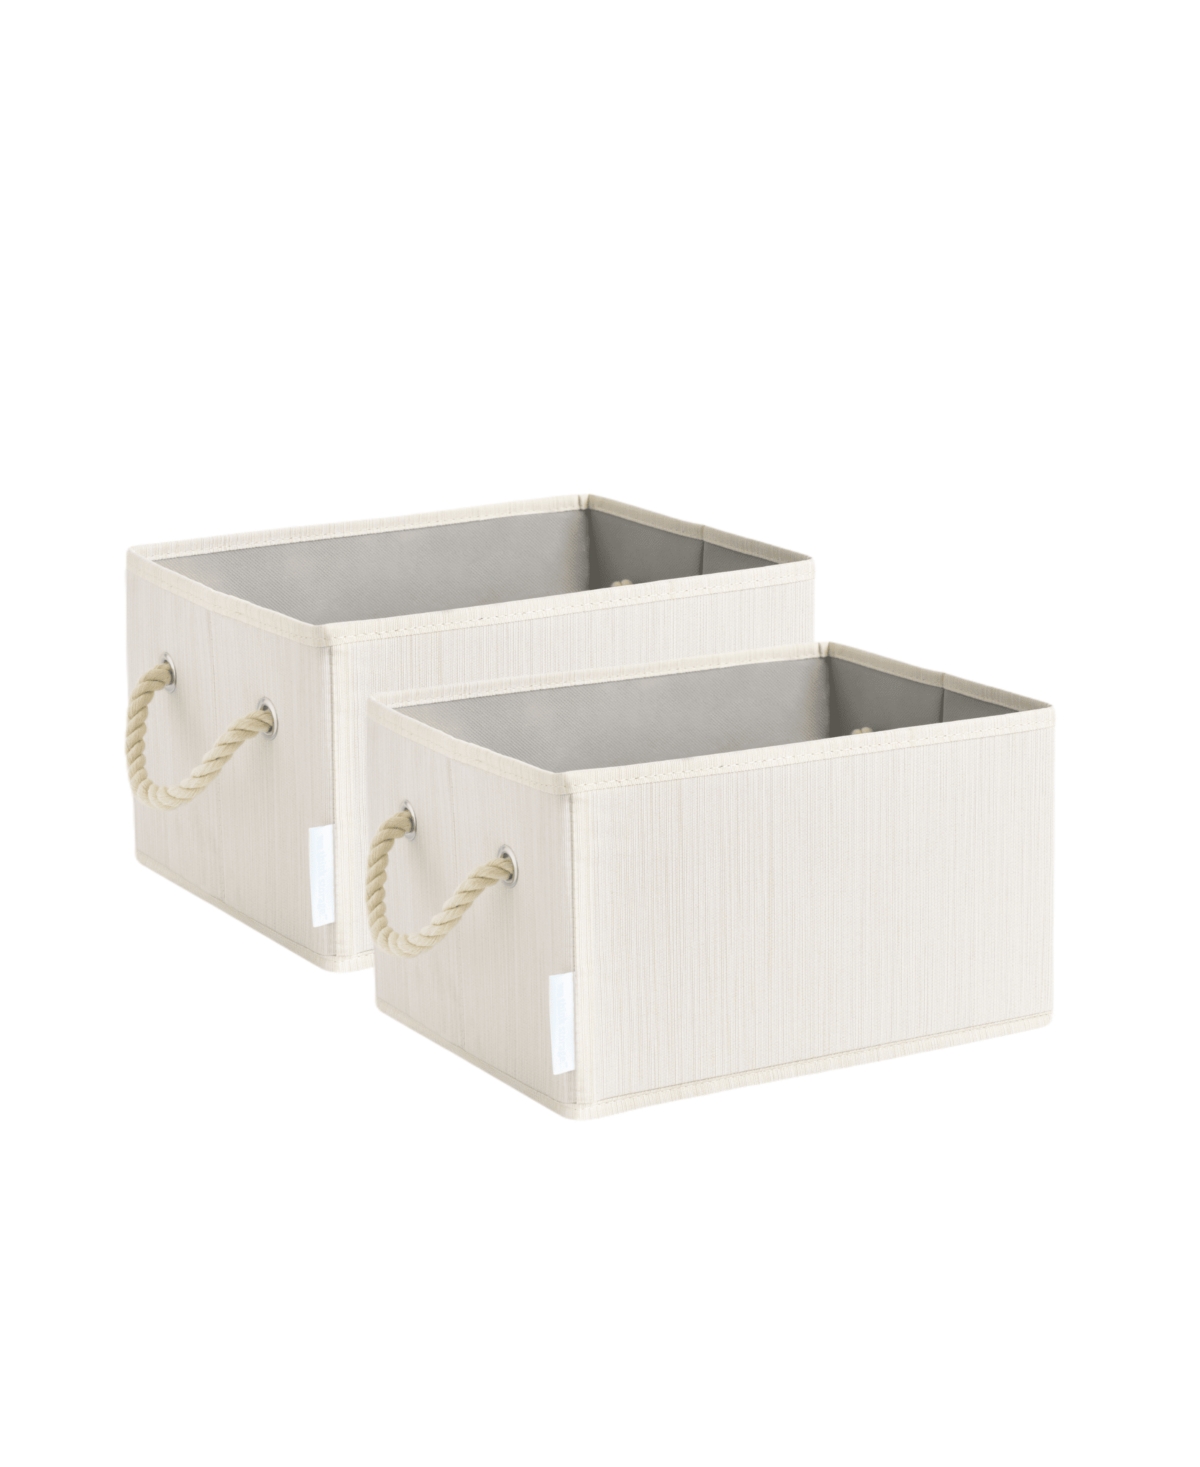 Wethinkstorage 11 Litre Collapsible Fabric Storage Bins With Cotton Rope Handles, Set Of 2 In Ivory